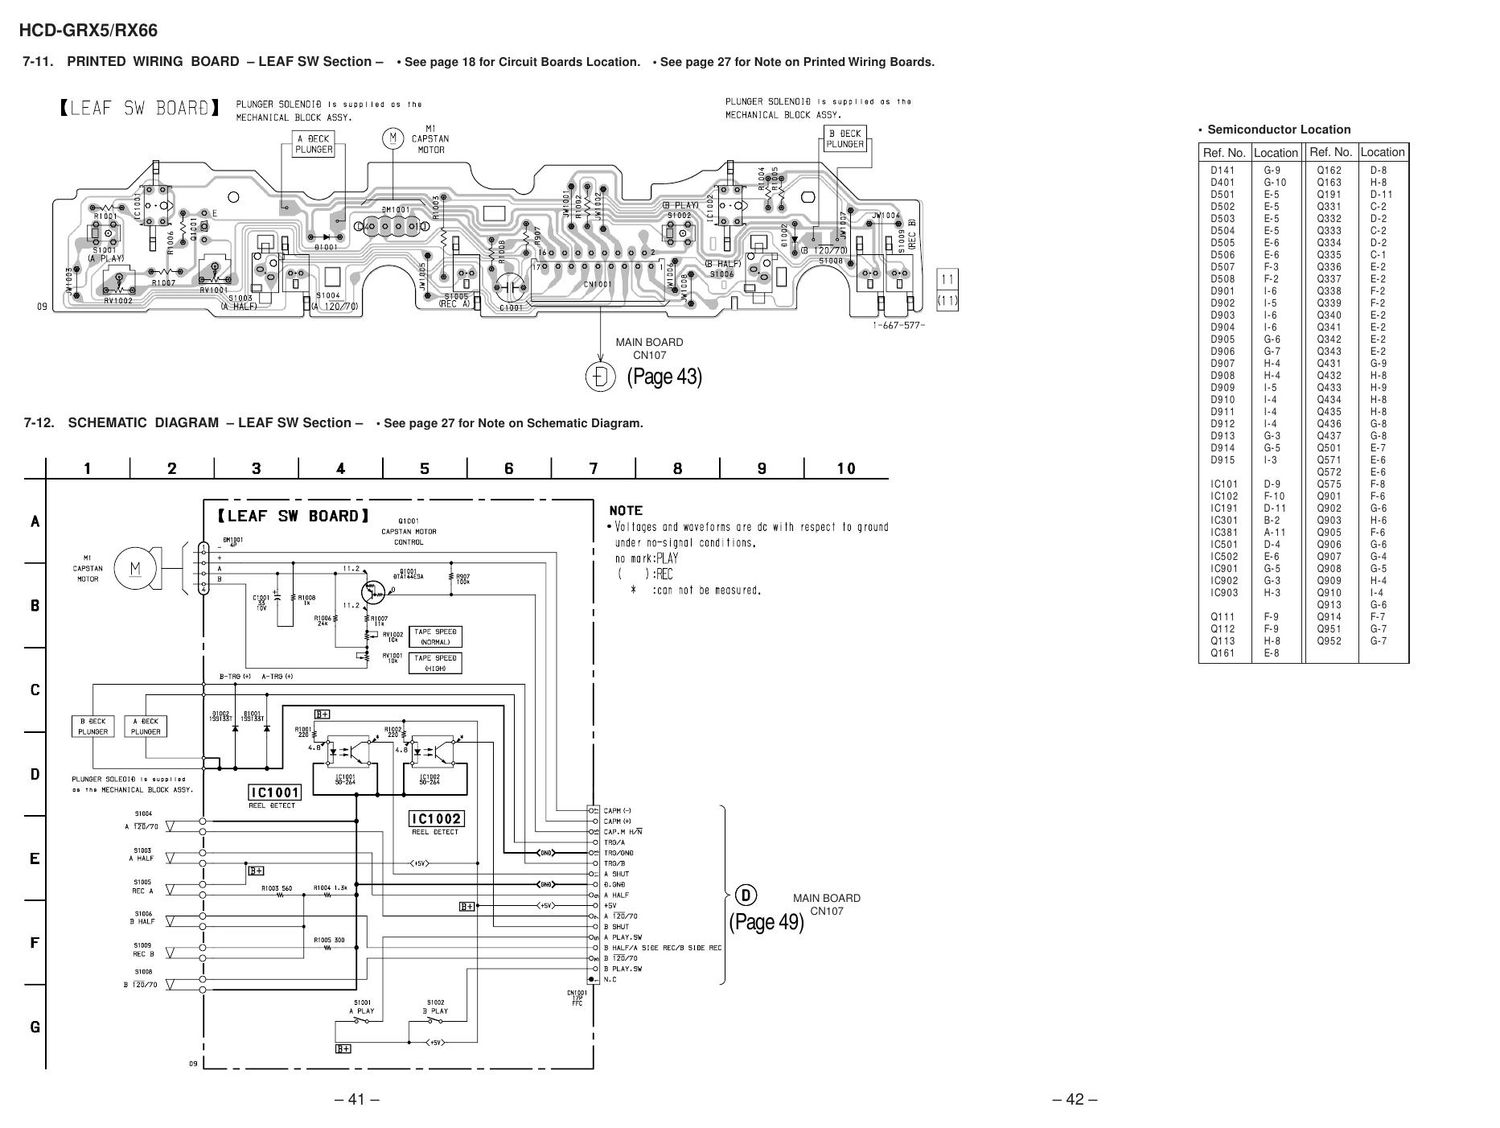 sony hcd grx 5 pages 31 32